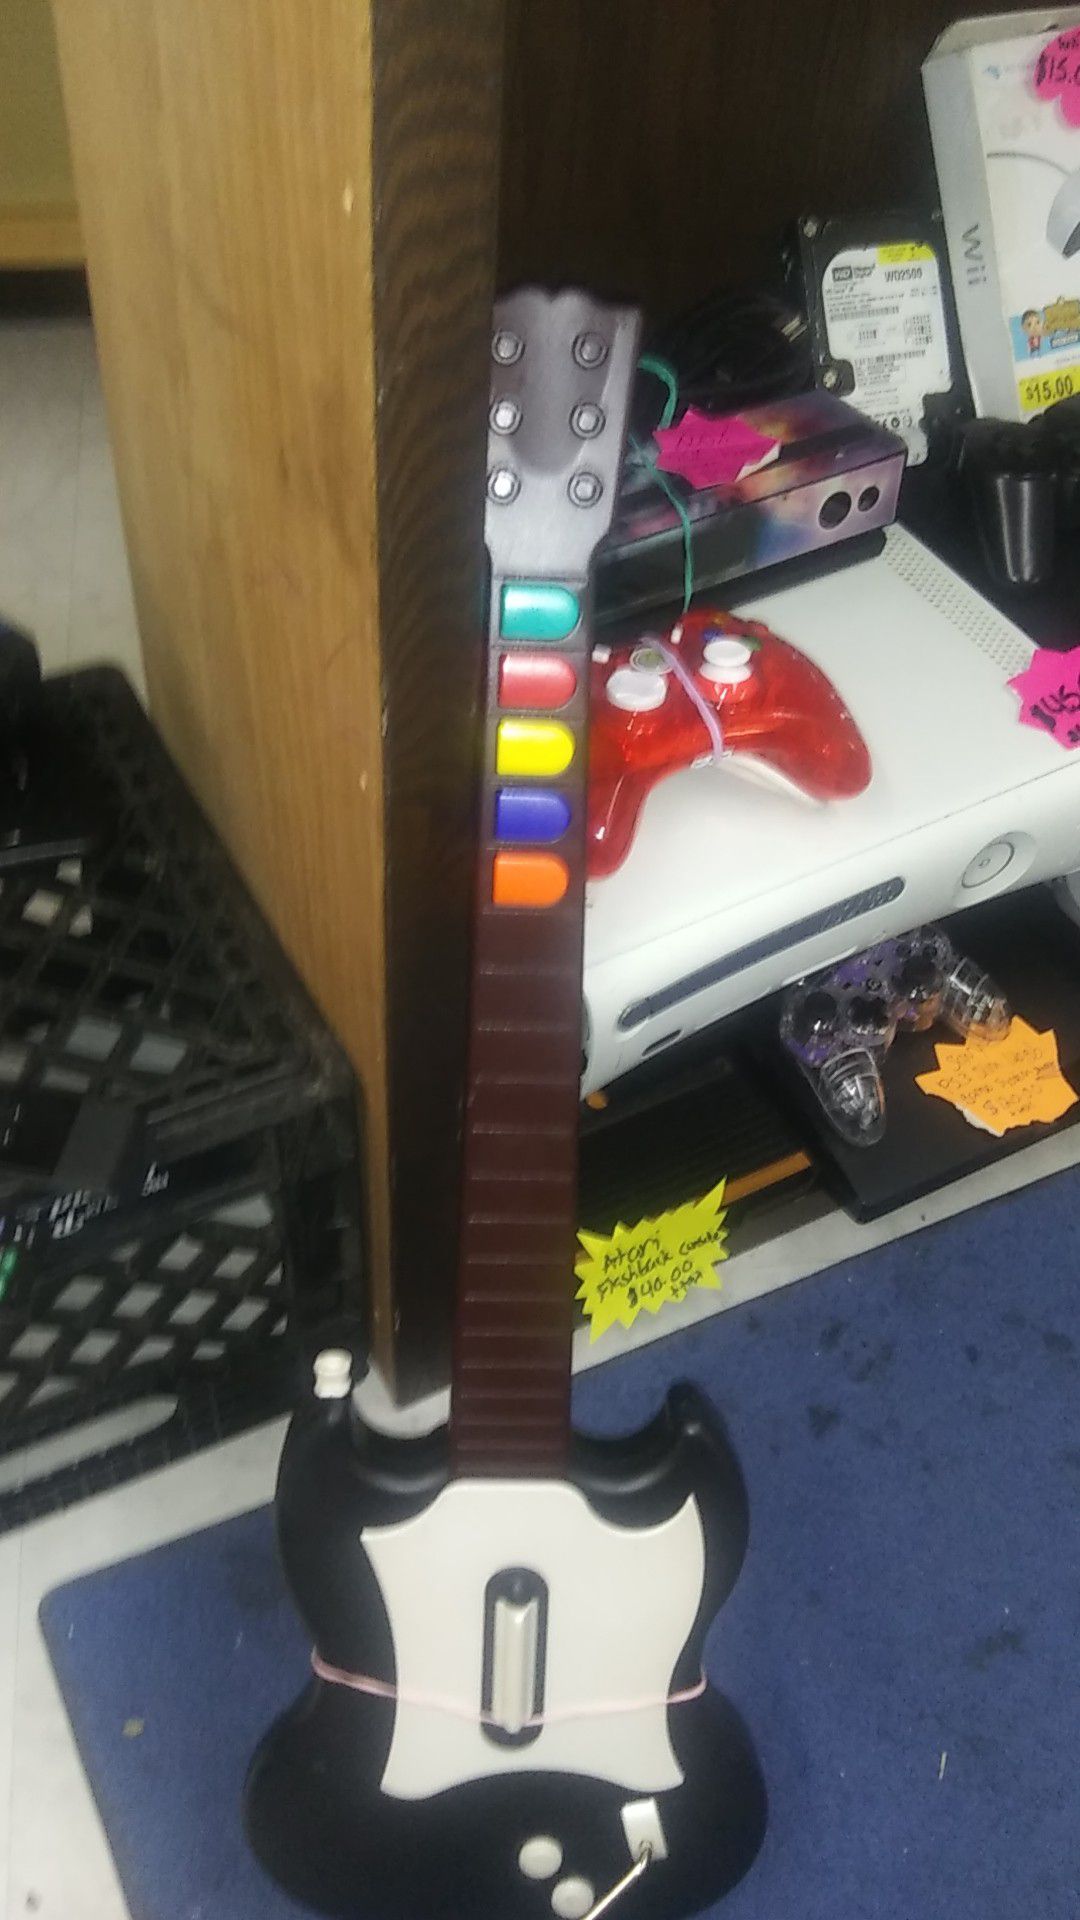 SONY-S2 ROCK BAND WIRED GUITAR! LIKE NEW!